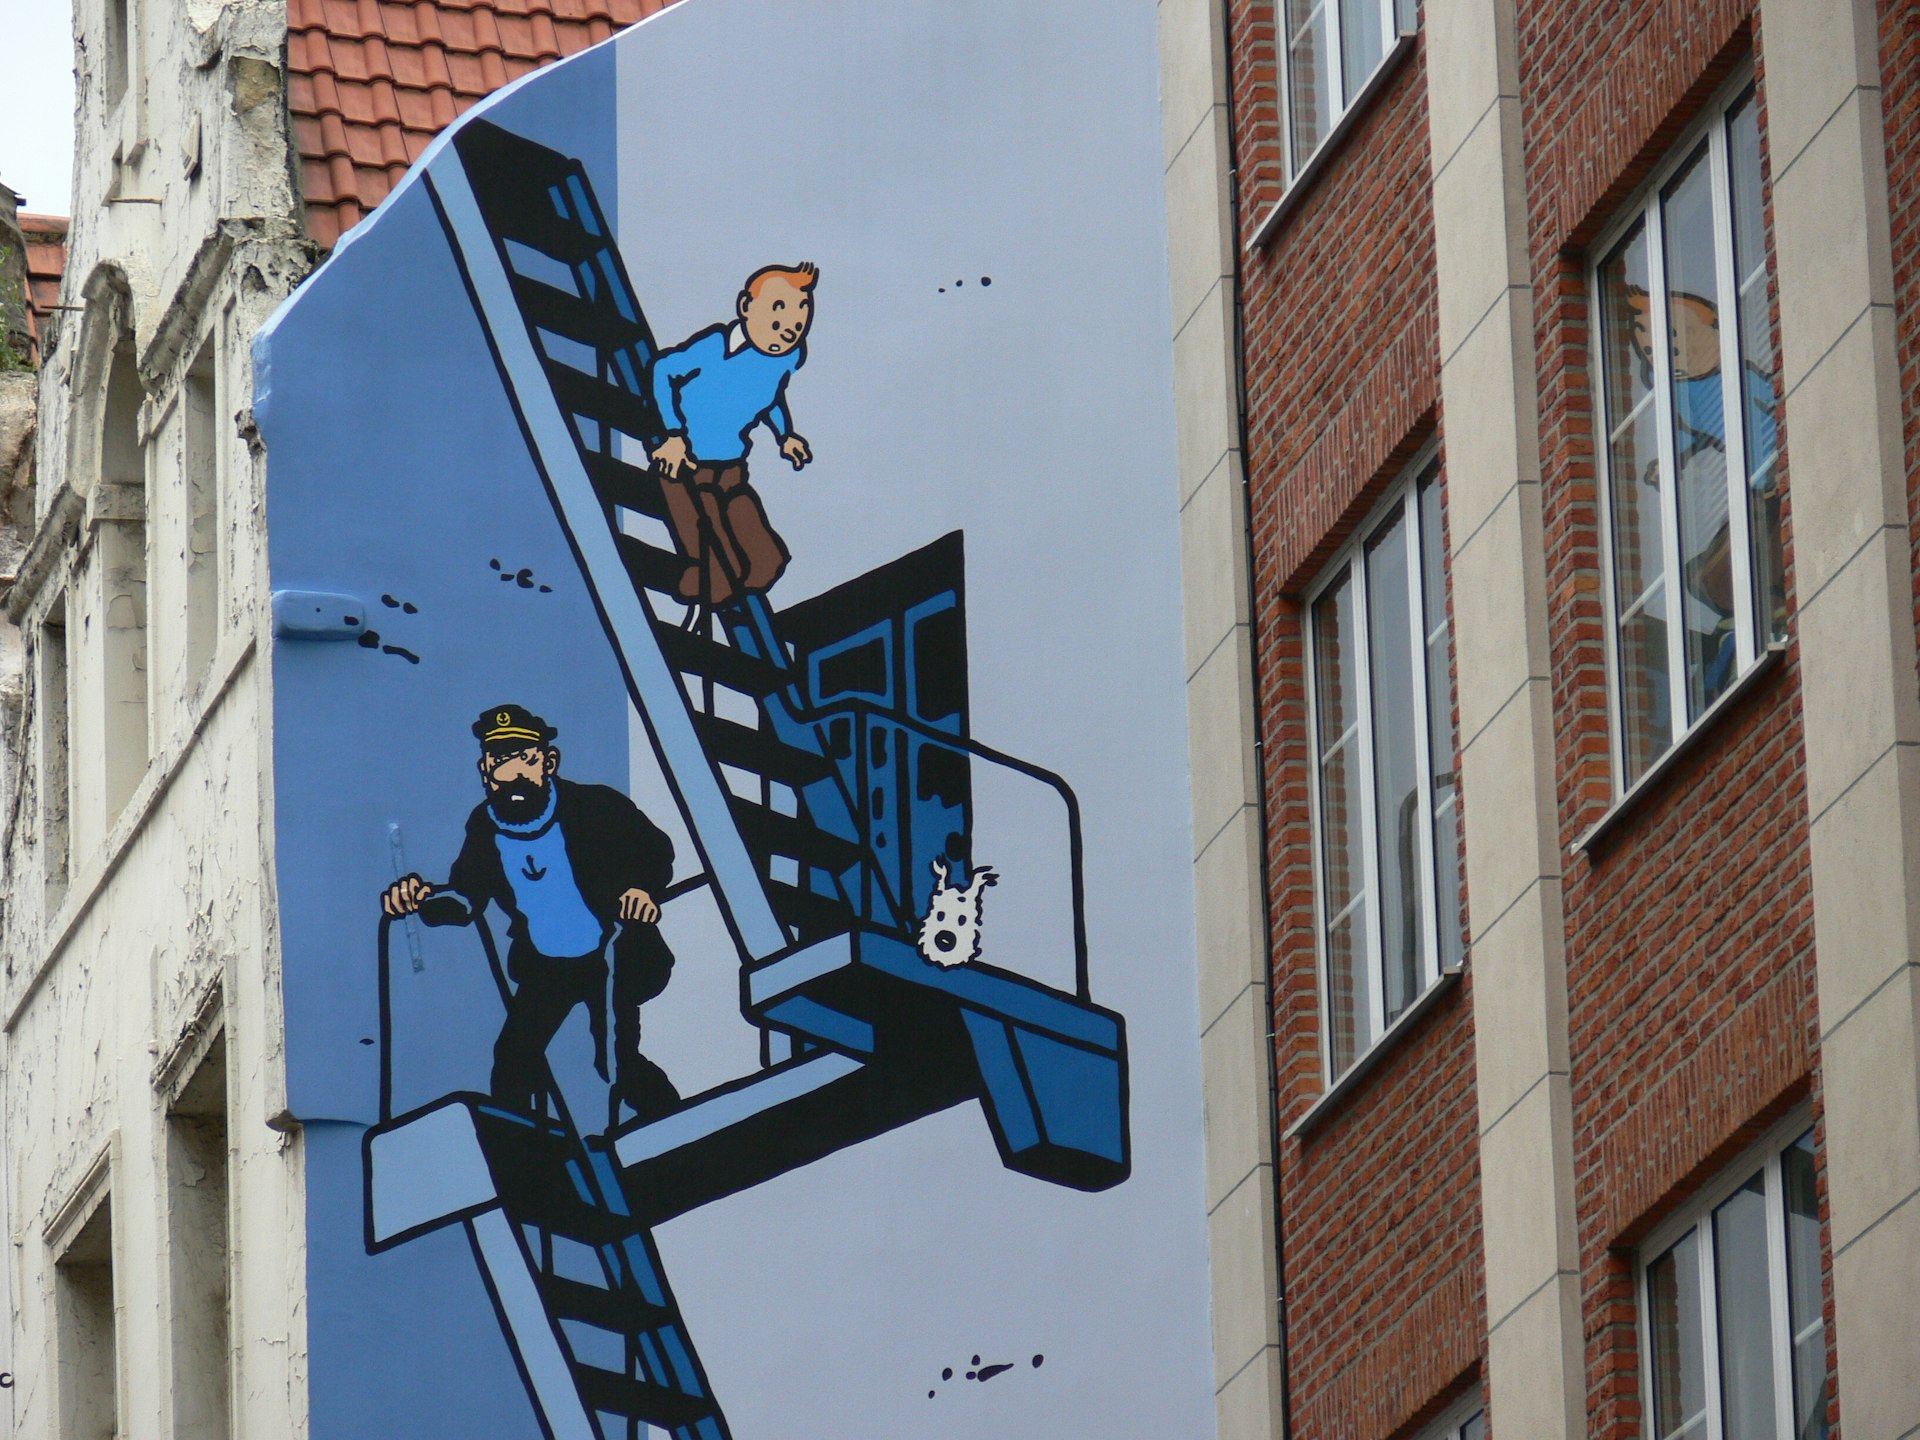 A Tintin mural on the comic book route in Brussels, Belgium, Europe